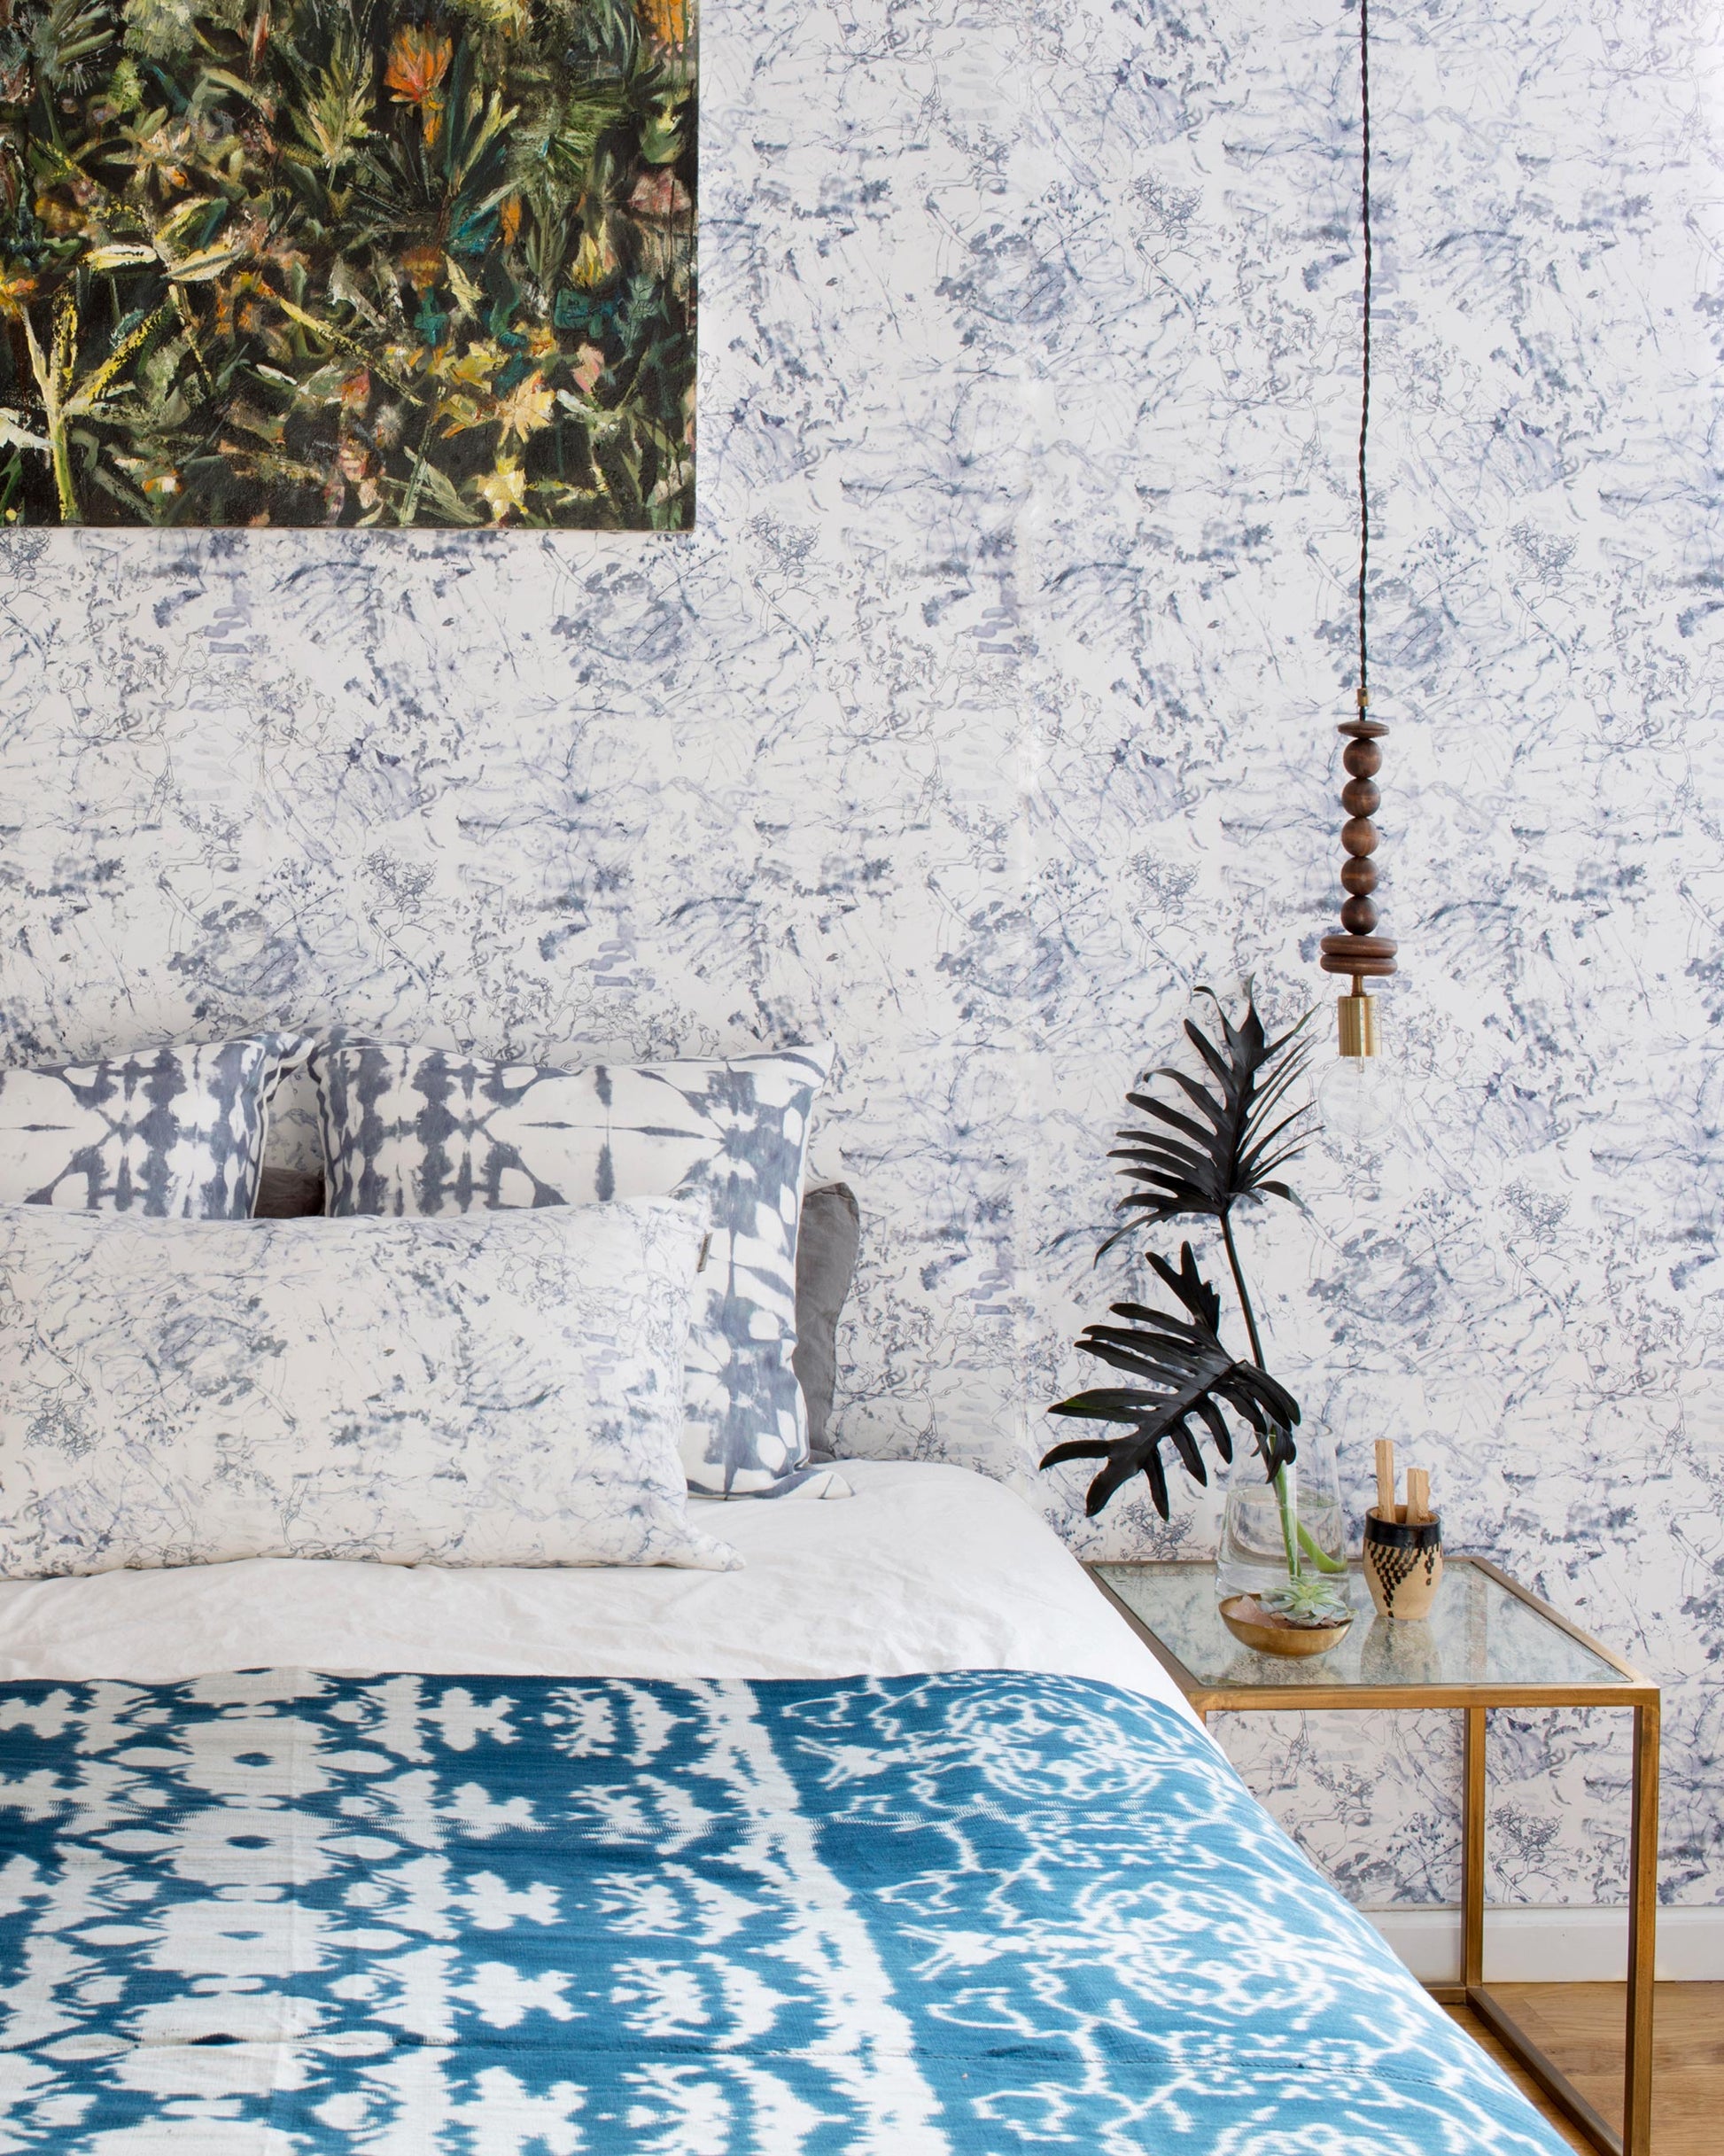 A luxury bed with a blue and white Bosky Toile Wallpaper||Midnight pattern on it.